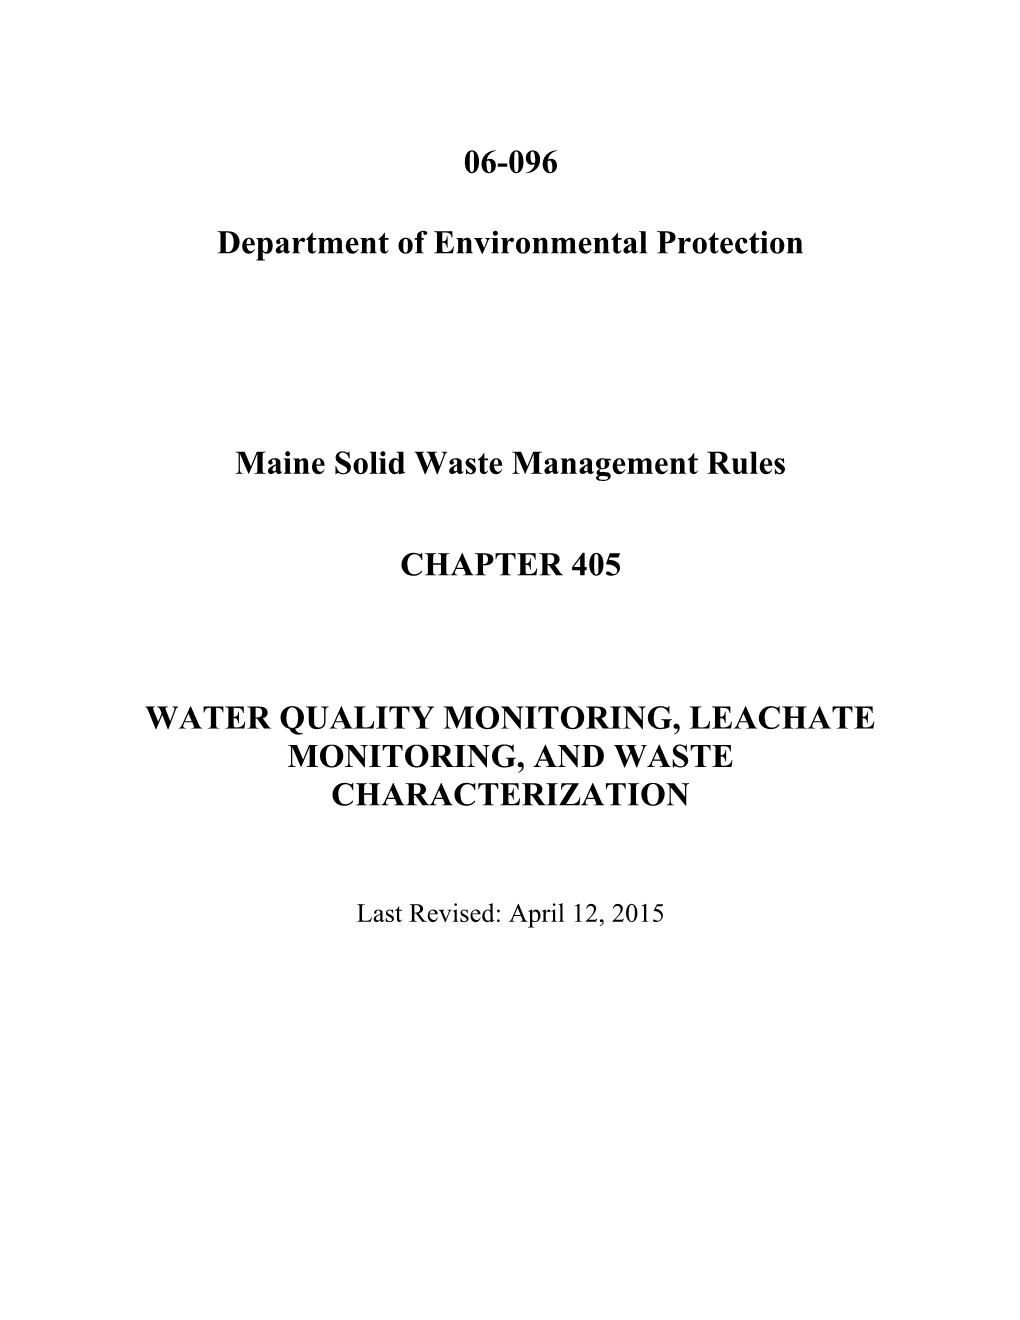 Maine Solid Waste Management Rules s1